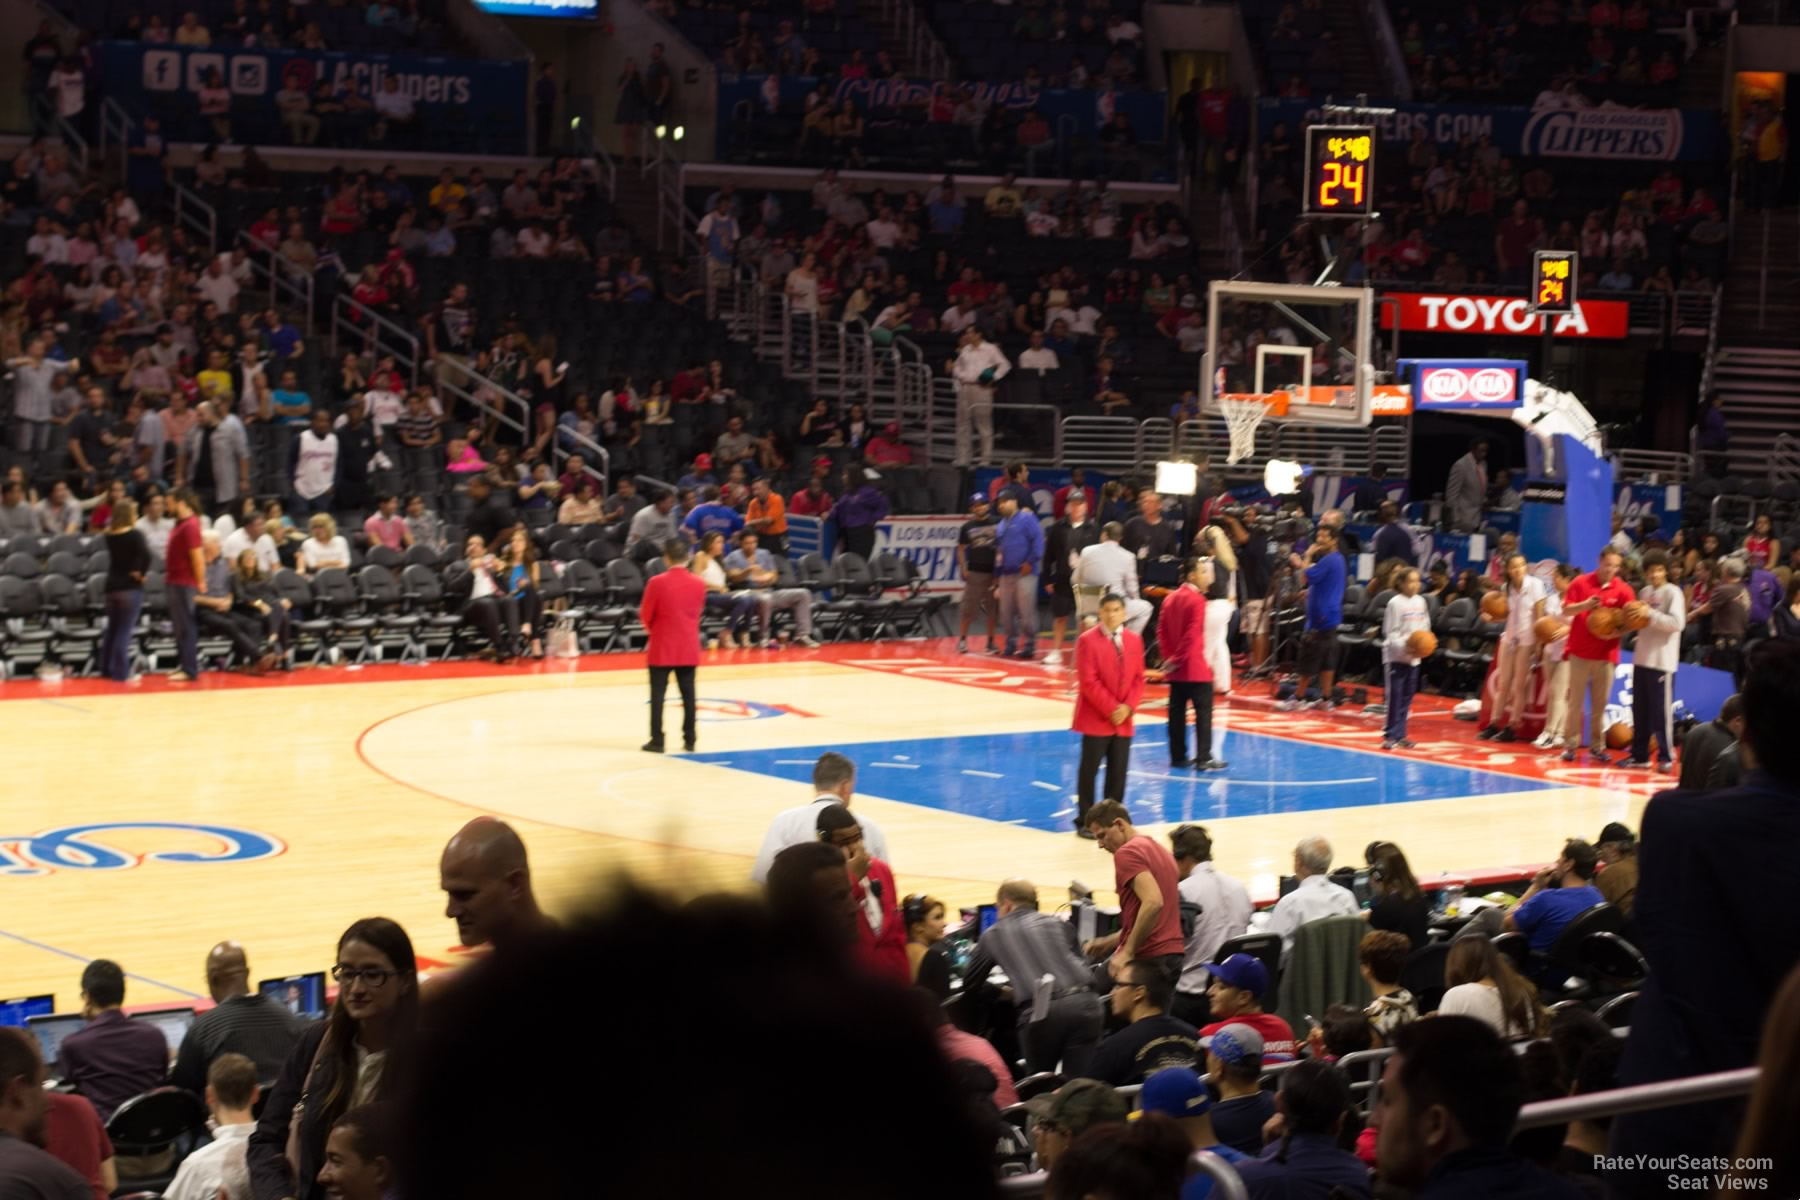 Staples Center Section 102 - Clippers/Lakers - RateYourSeats.com1800 x 1200